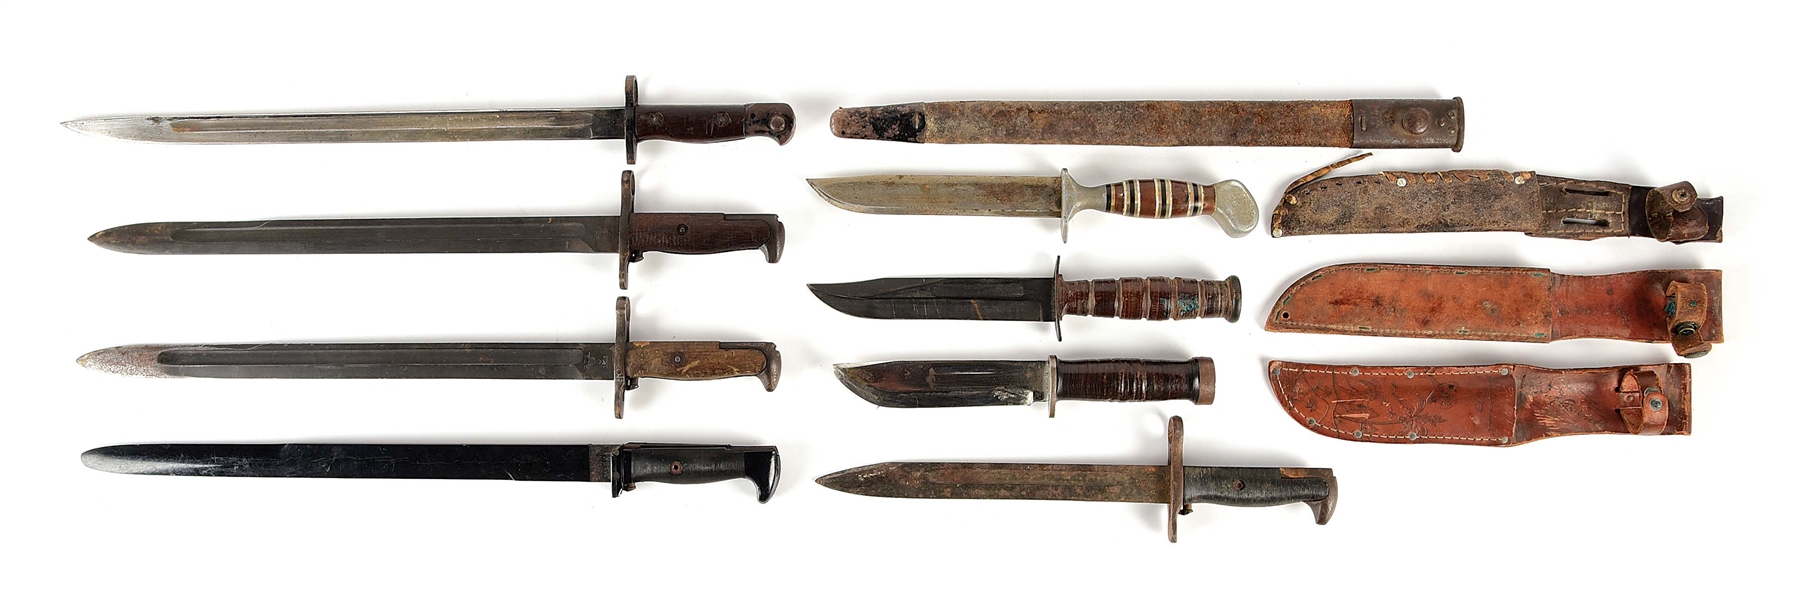 LOT OF 8: US WWI AND WWII FIGHTING KNIVES AND BAYONETS.